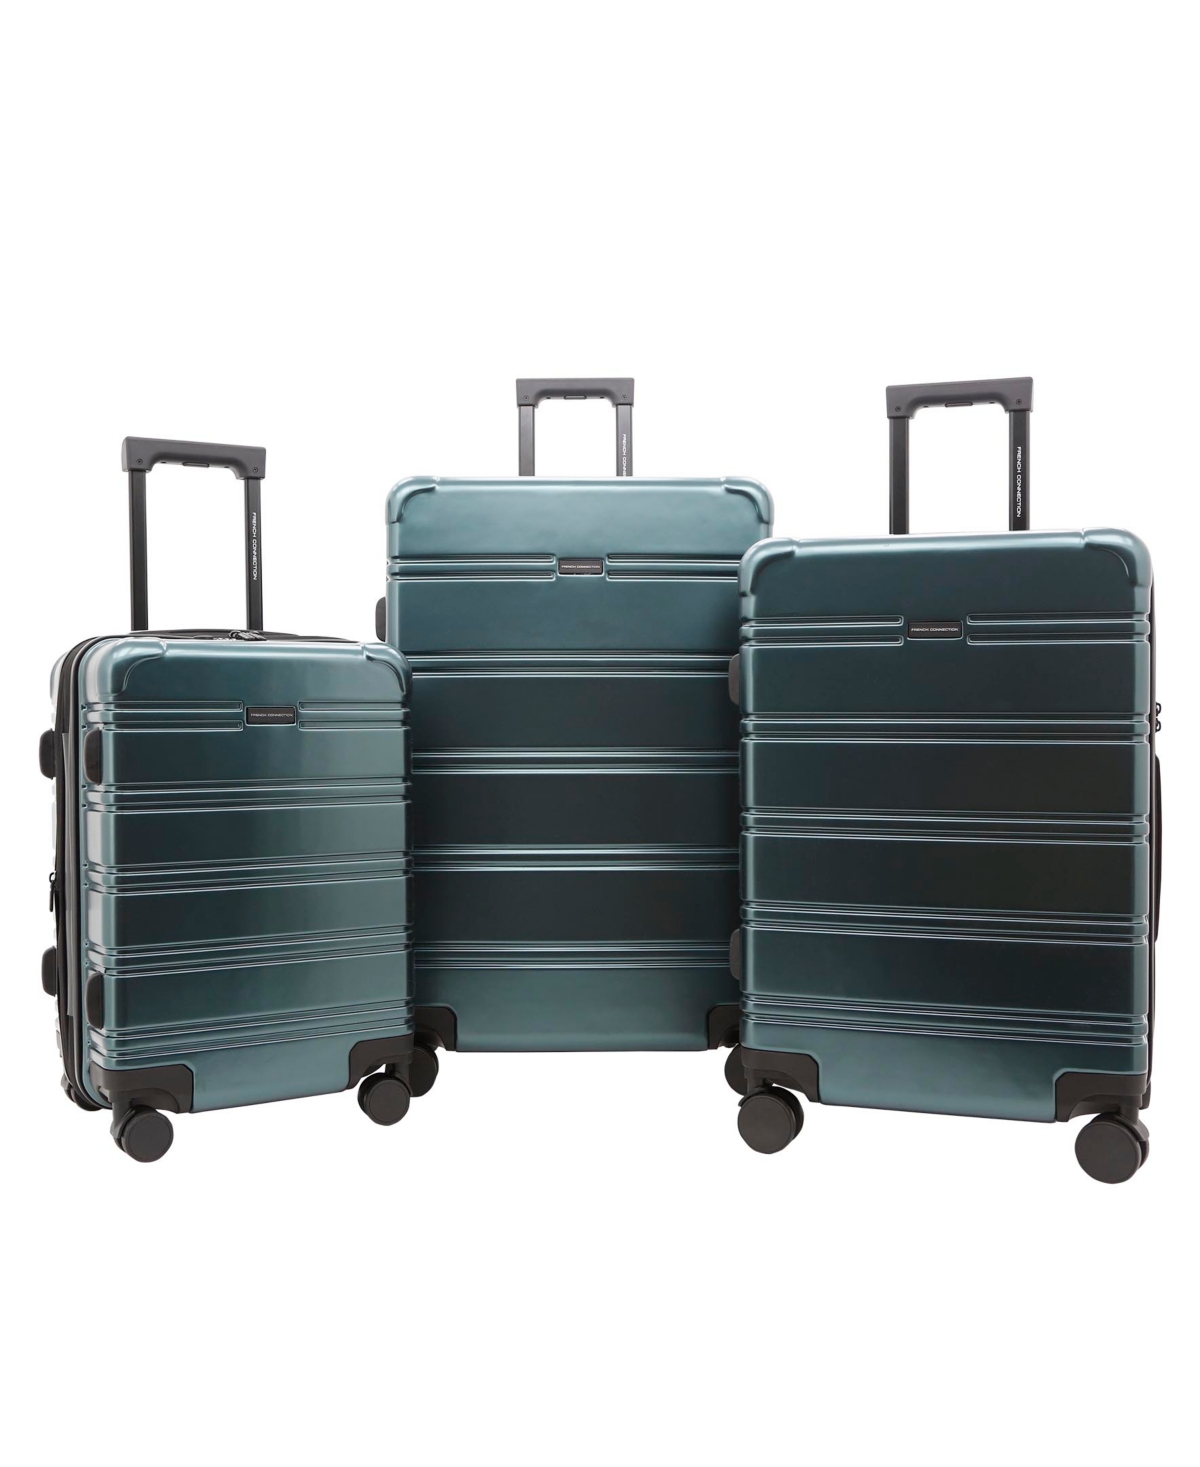 French Connection Conrad Expandable Rolling Hardside Luggage Set, 3 Piece In Green